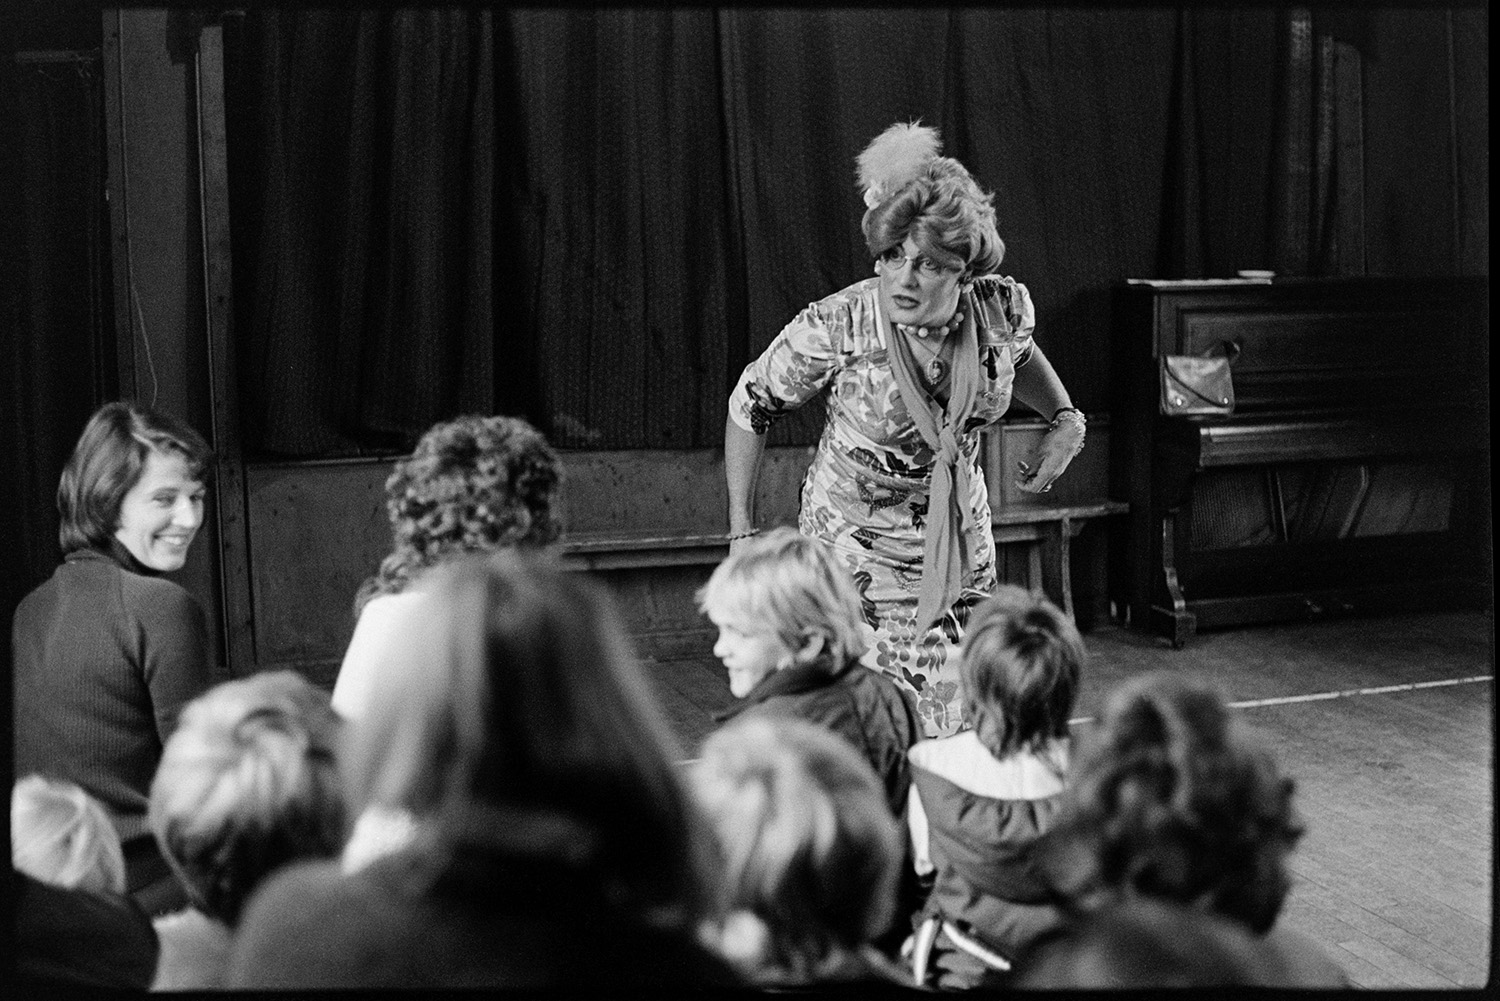 Drag artist in school, with children. 
[The drag artist, Henrietta Sluggit performing for a group of school children and teachers in a school hall. A stage and piano are visible in the background.]